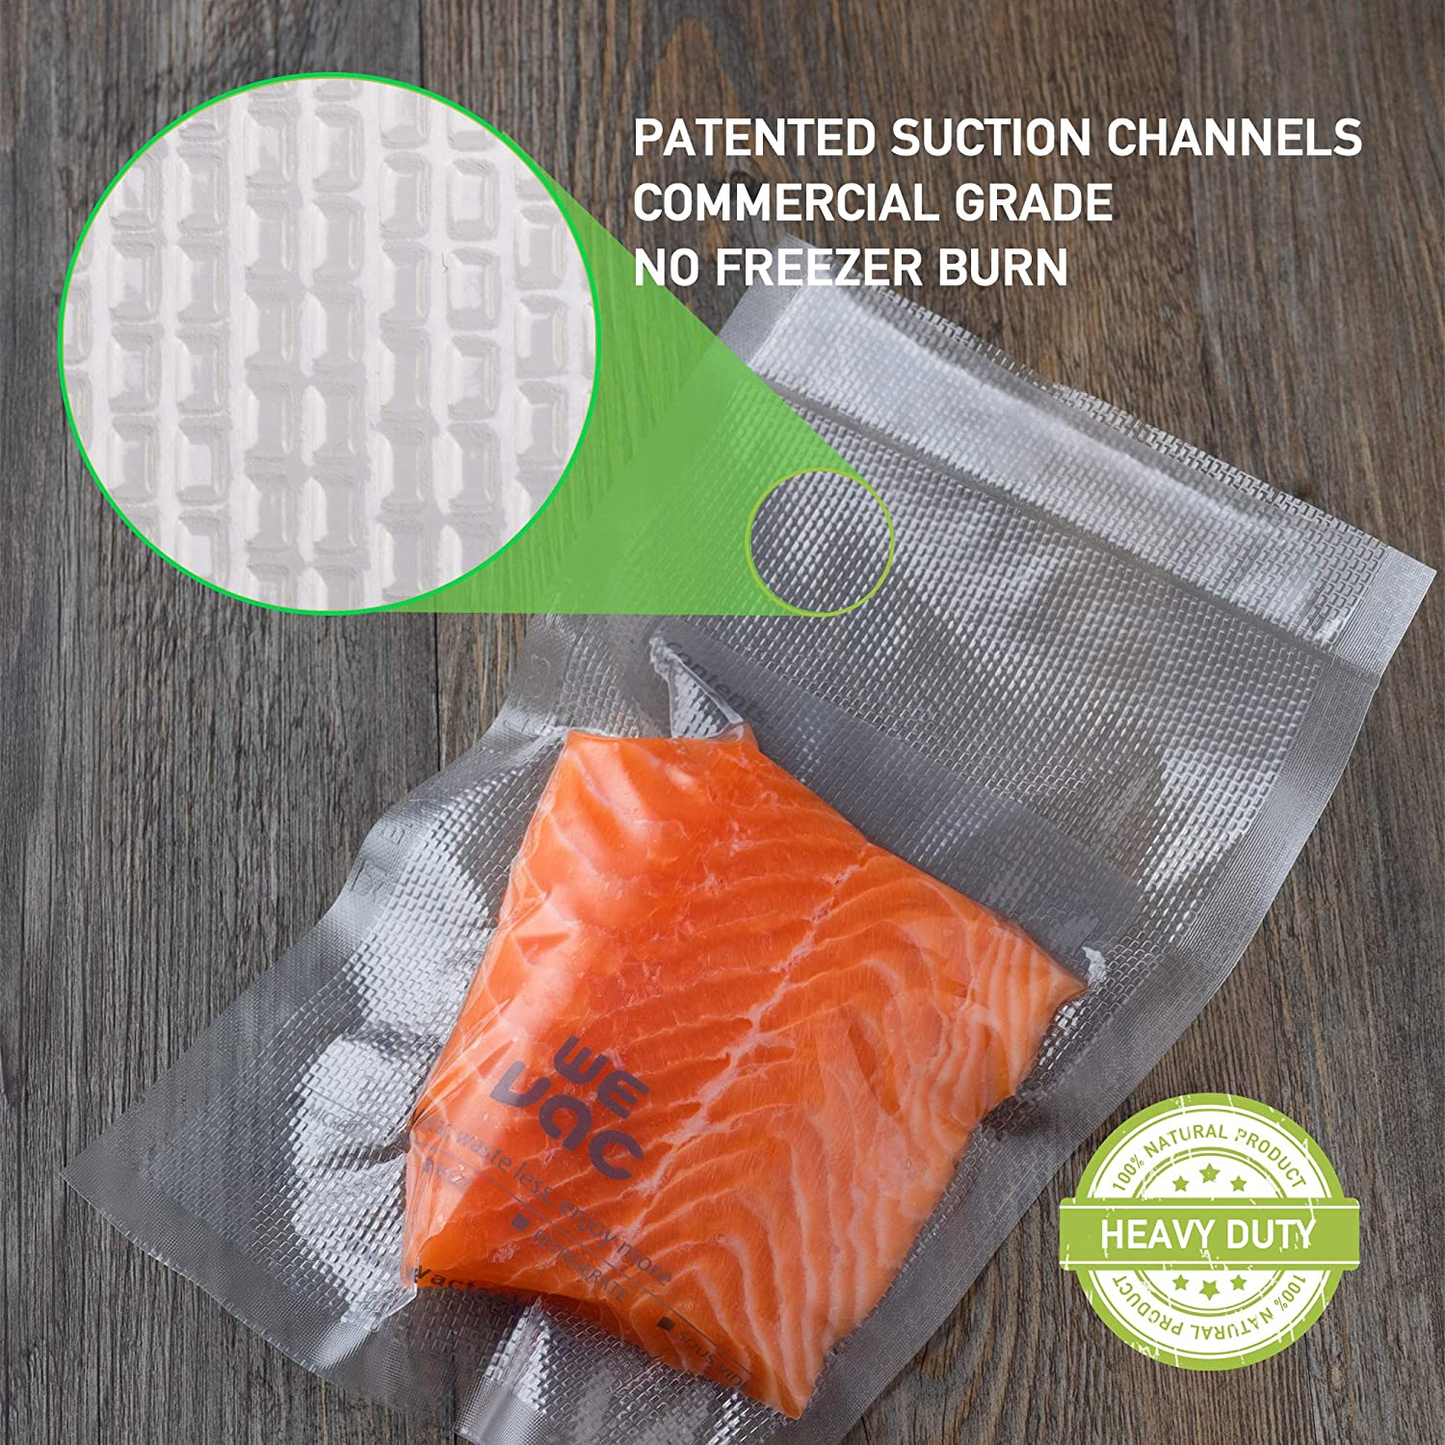 Vacuum Sealer Bags 8X50 Rolls 2 Pack for Food Saver, Seal a Meal, Weston. Commercial Grade, BPA Free, Heavy Duty, Great for Vac Storage, Meal Prep or Sous Vide